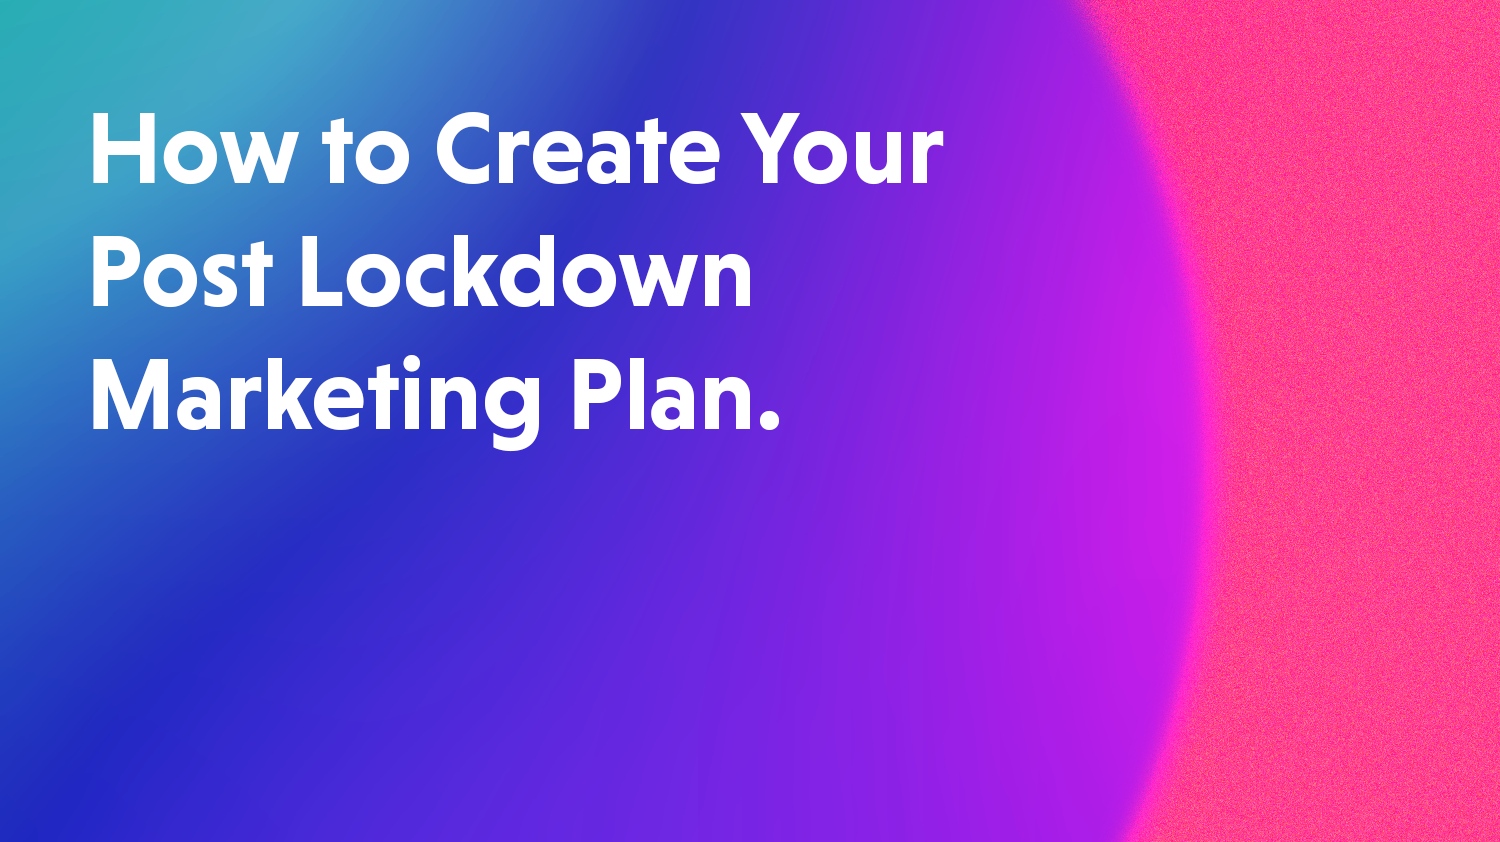 How To Create A Post Lockdown Marketing Plan